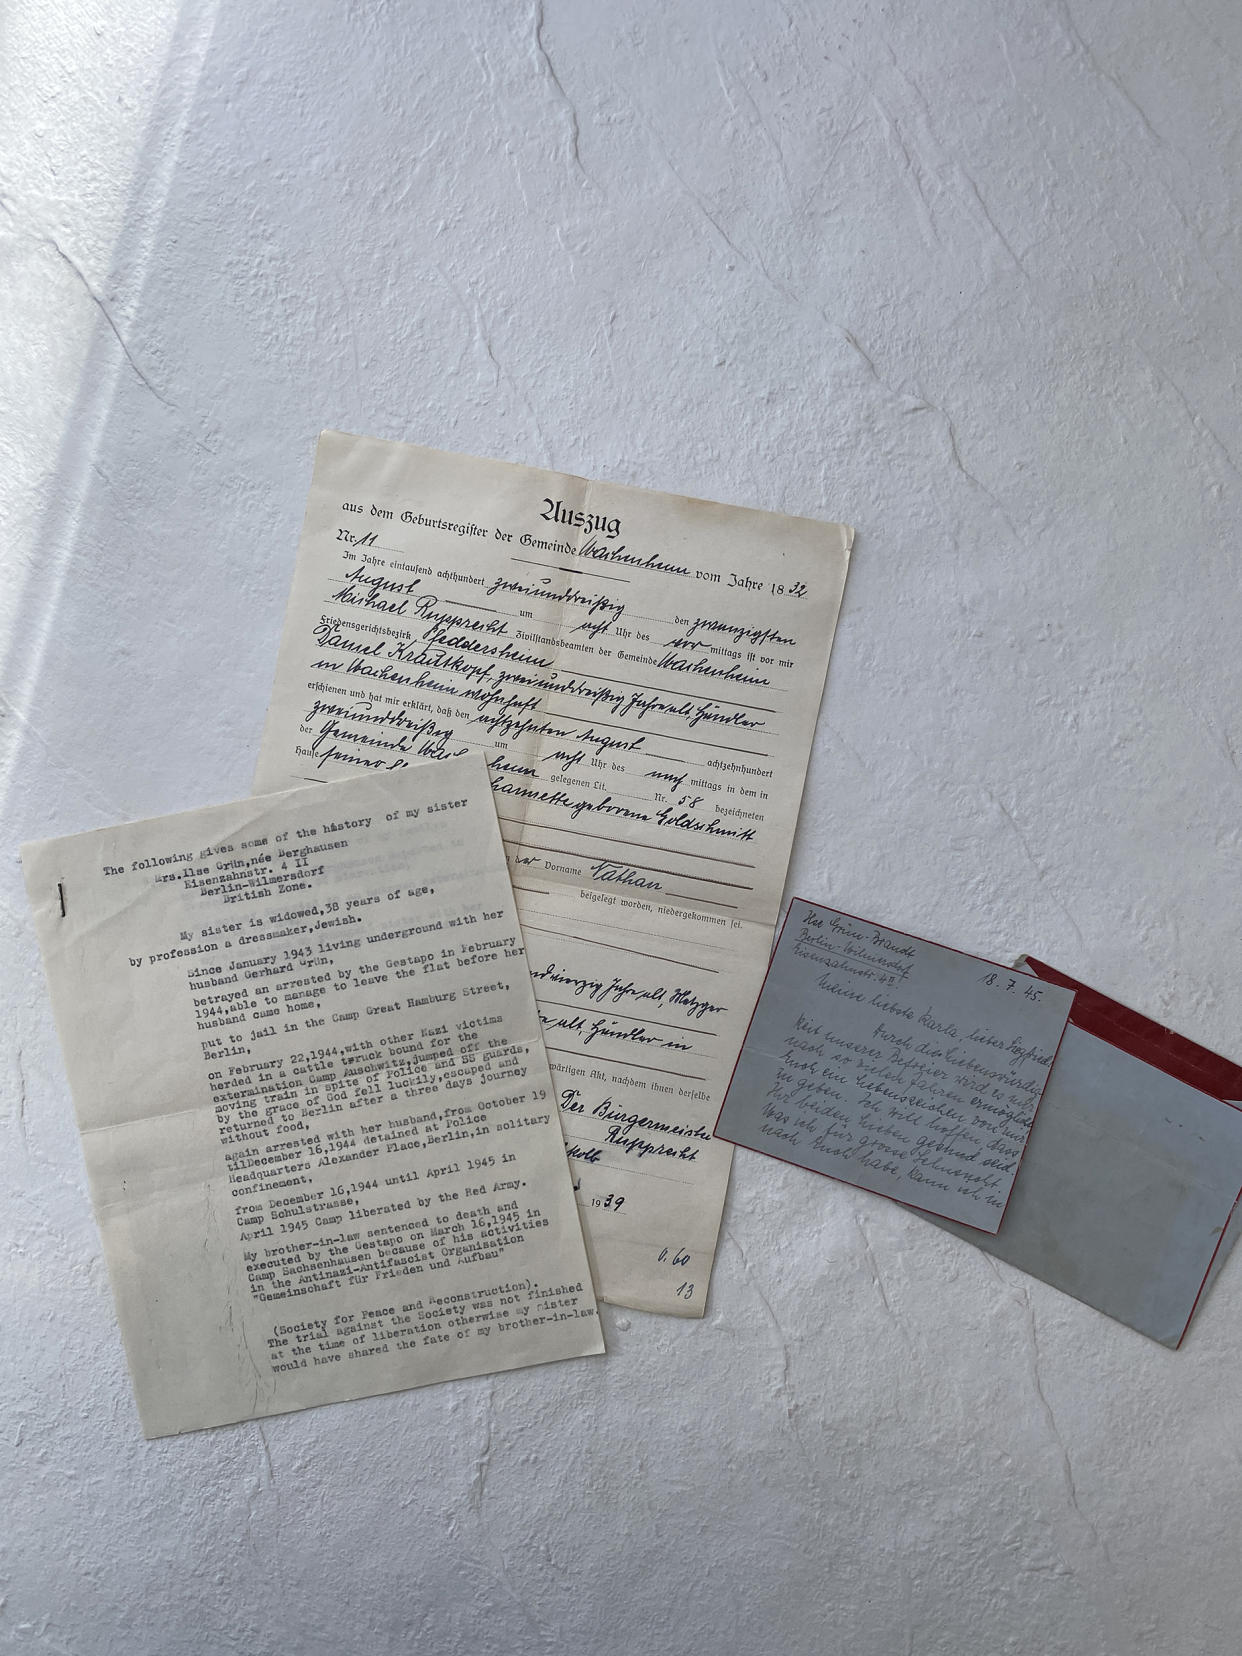 The documents included an accounting of what Loewenberg went through during the Holocaust and a personal letter she wrote her sister. (Jill Butler)